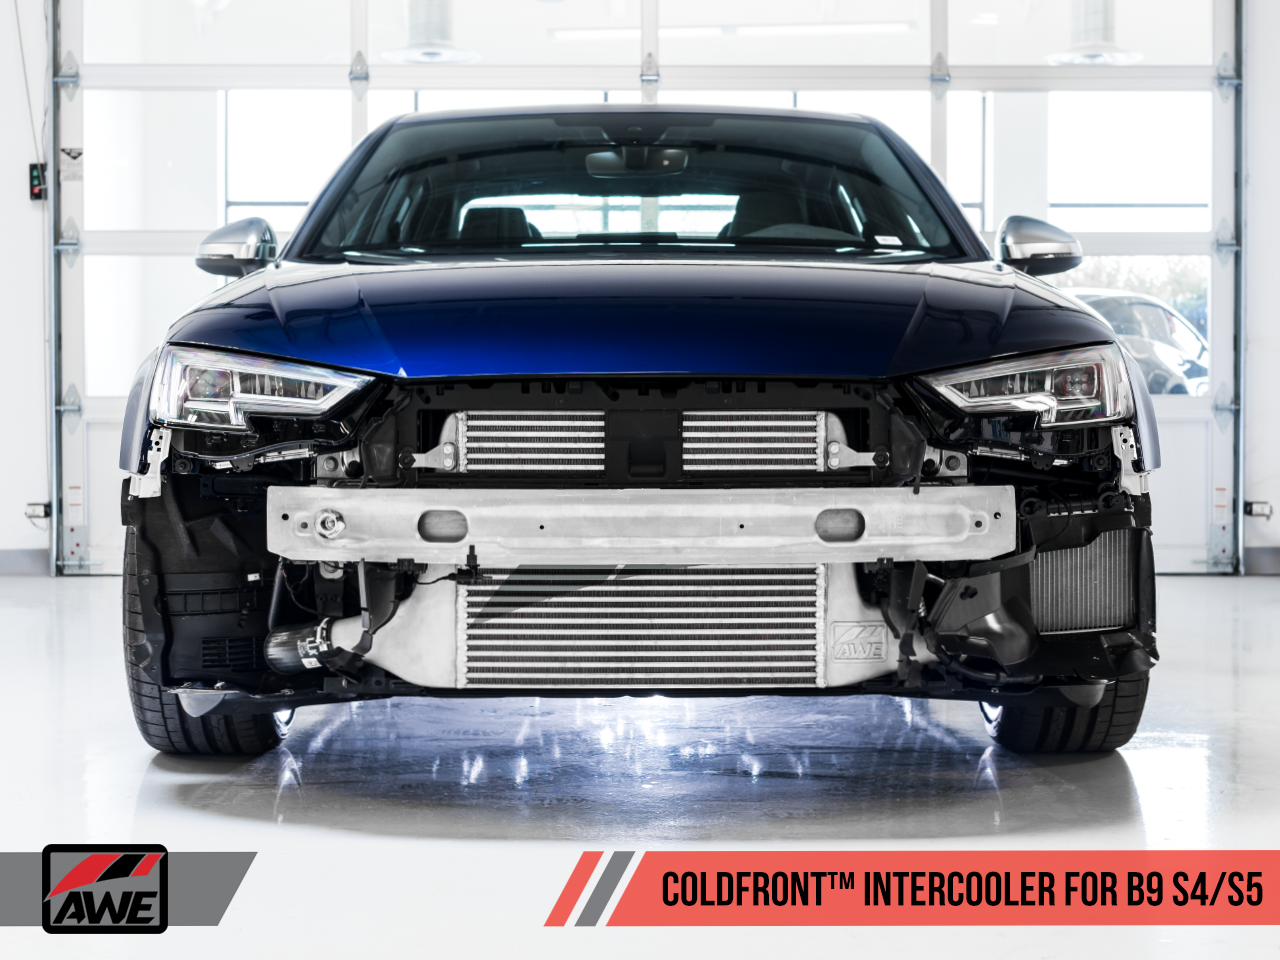 AWE Tuning ColdFront Intercooler for the Audi B9 S4 / S5 3.0T